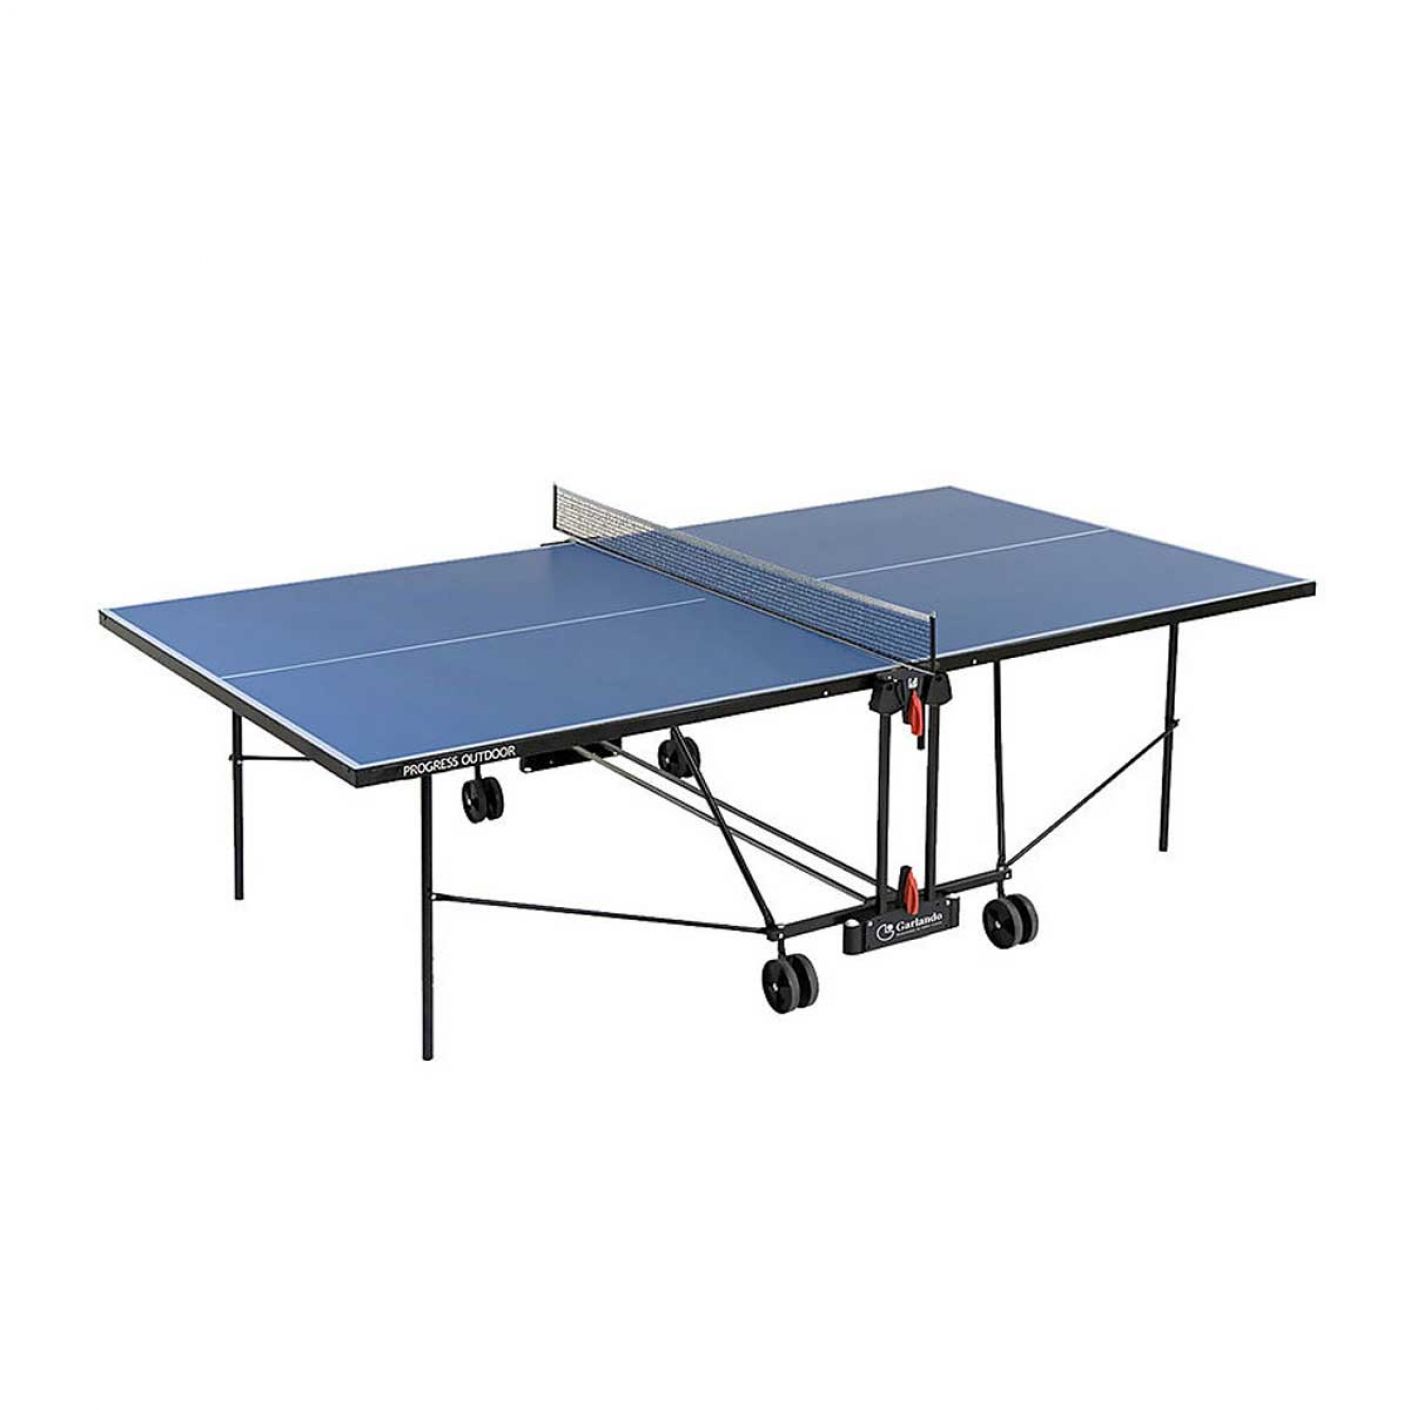 Garlando Ping Pong Table Progress Outdoor Blue with wheels for outdoor